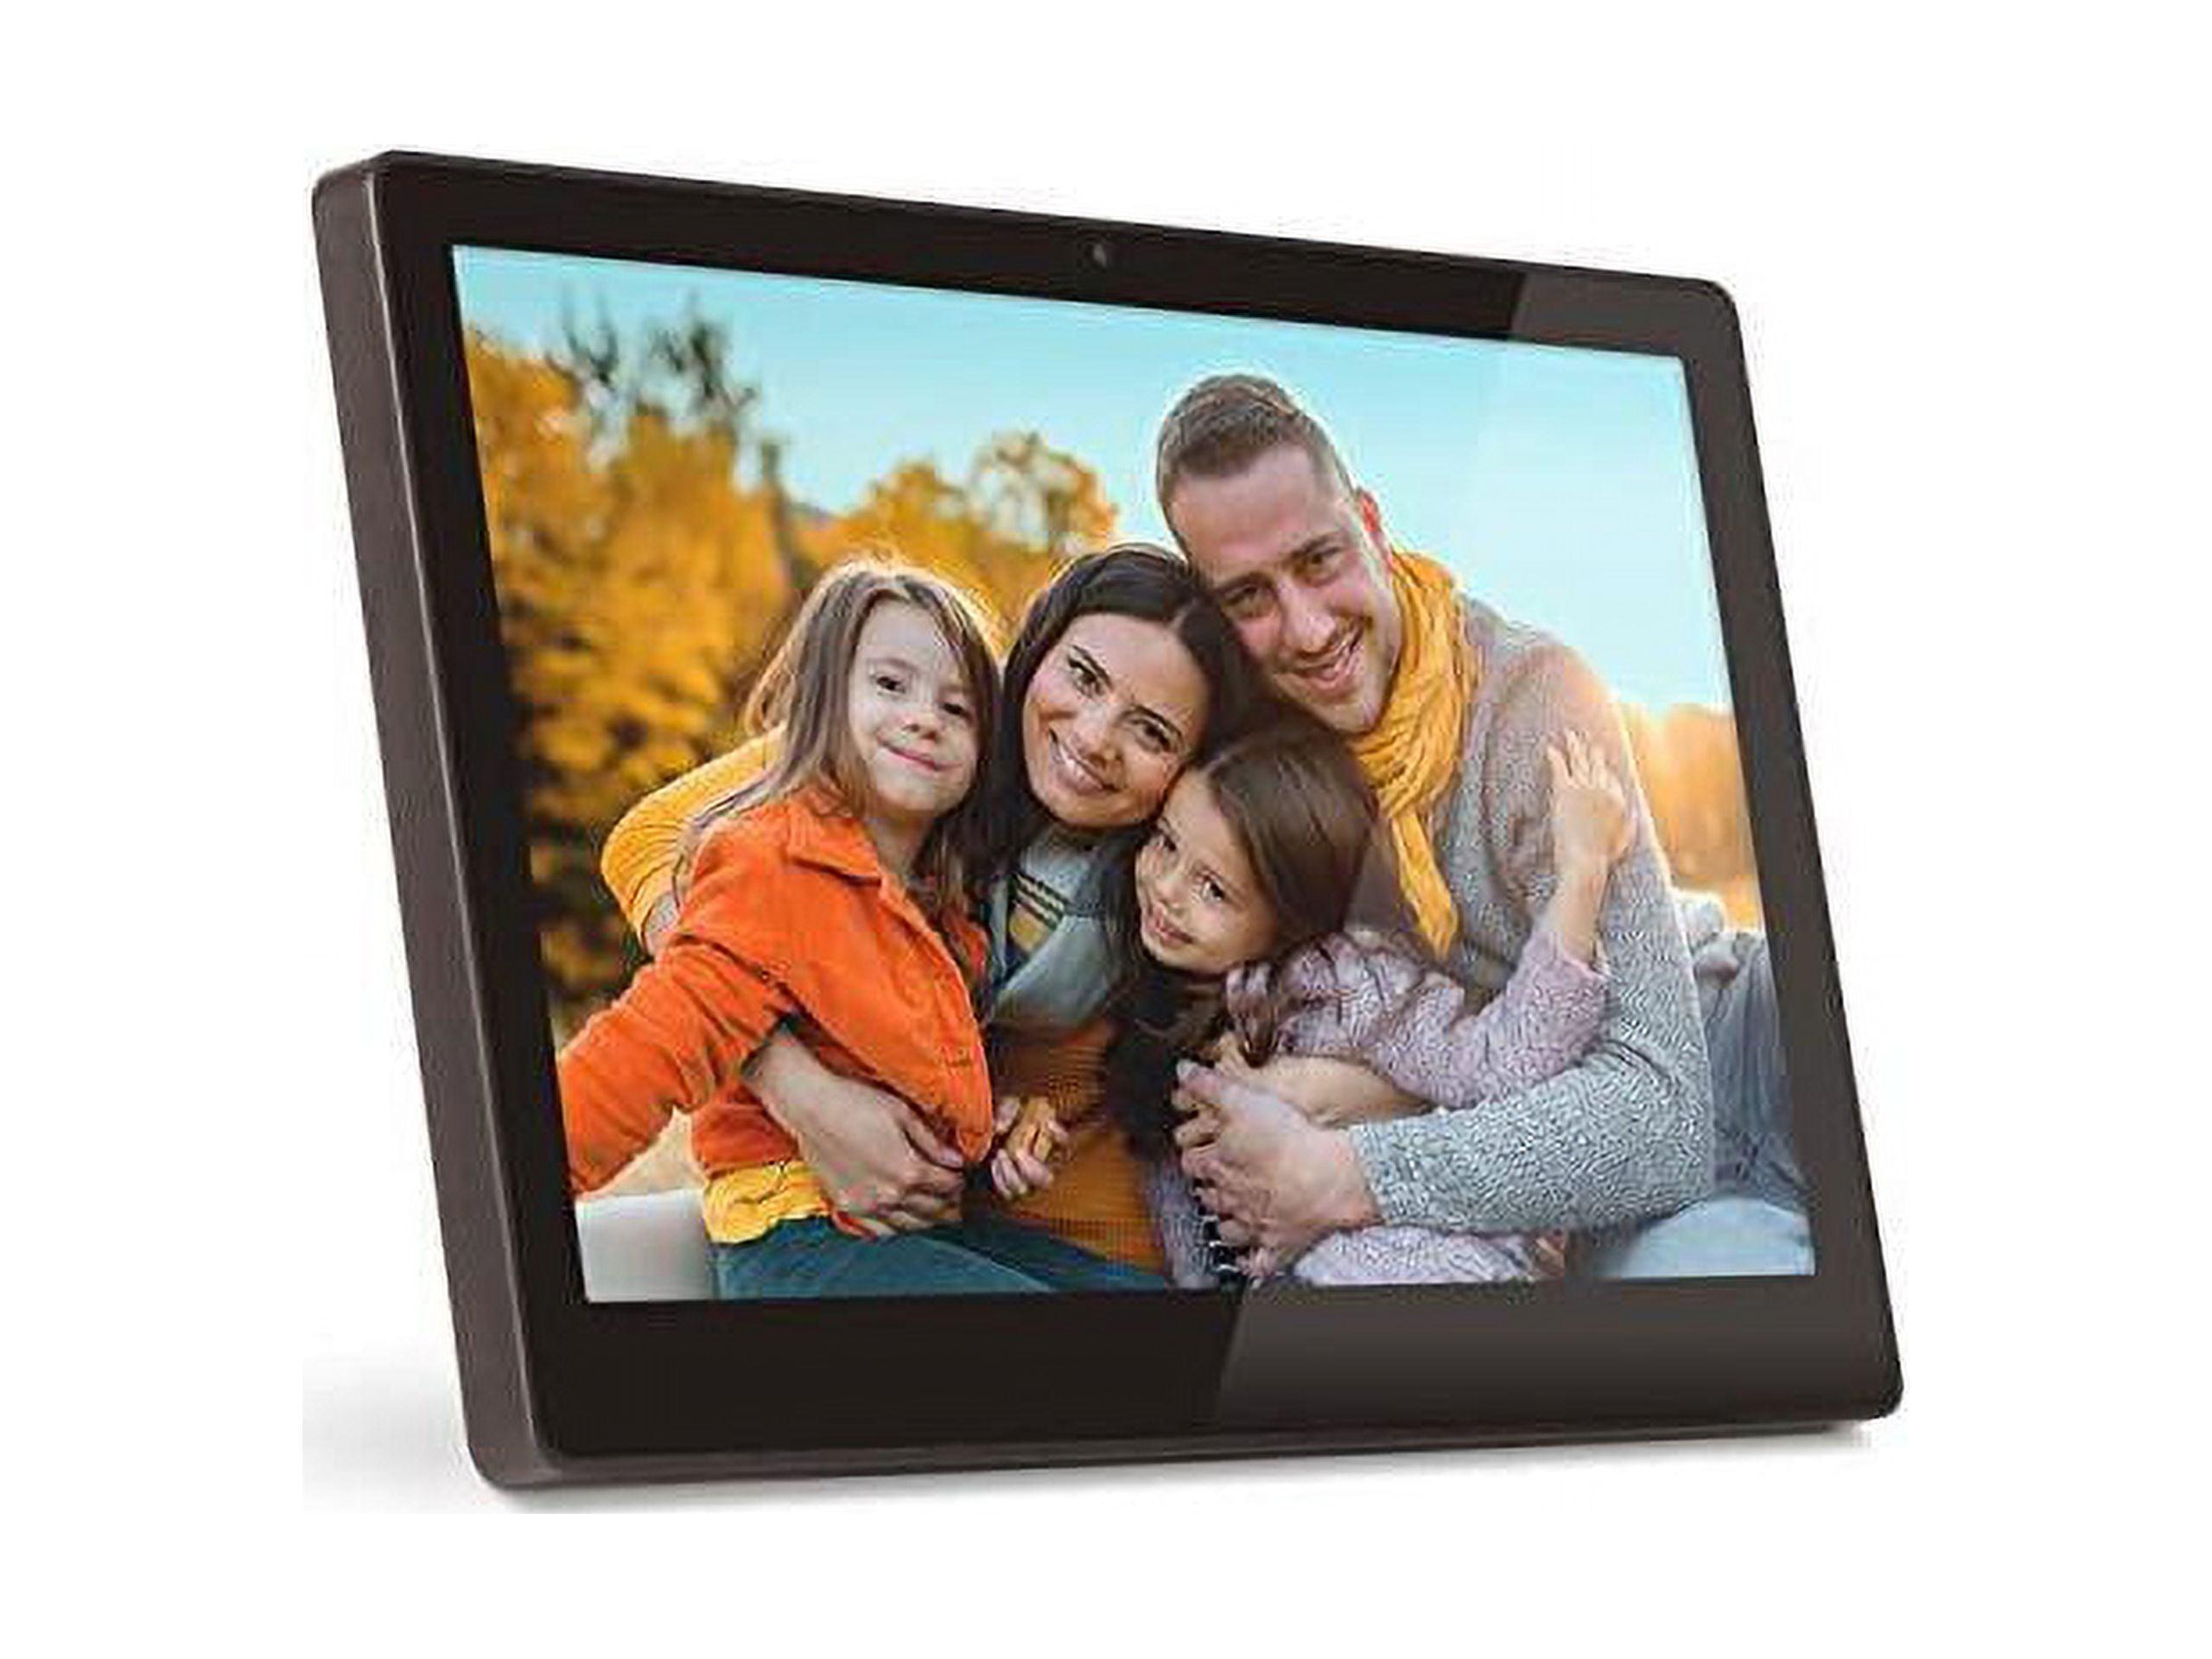 Aluratek 11.6" Touchscreen WiFi Digital Photo Frame with Live Video Chat, Black